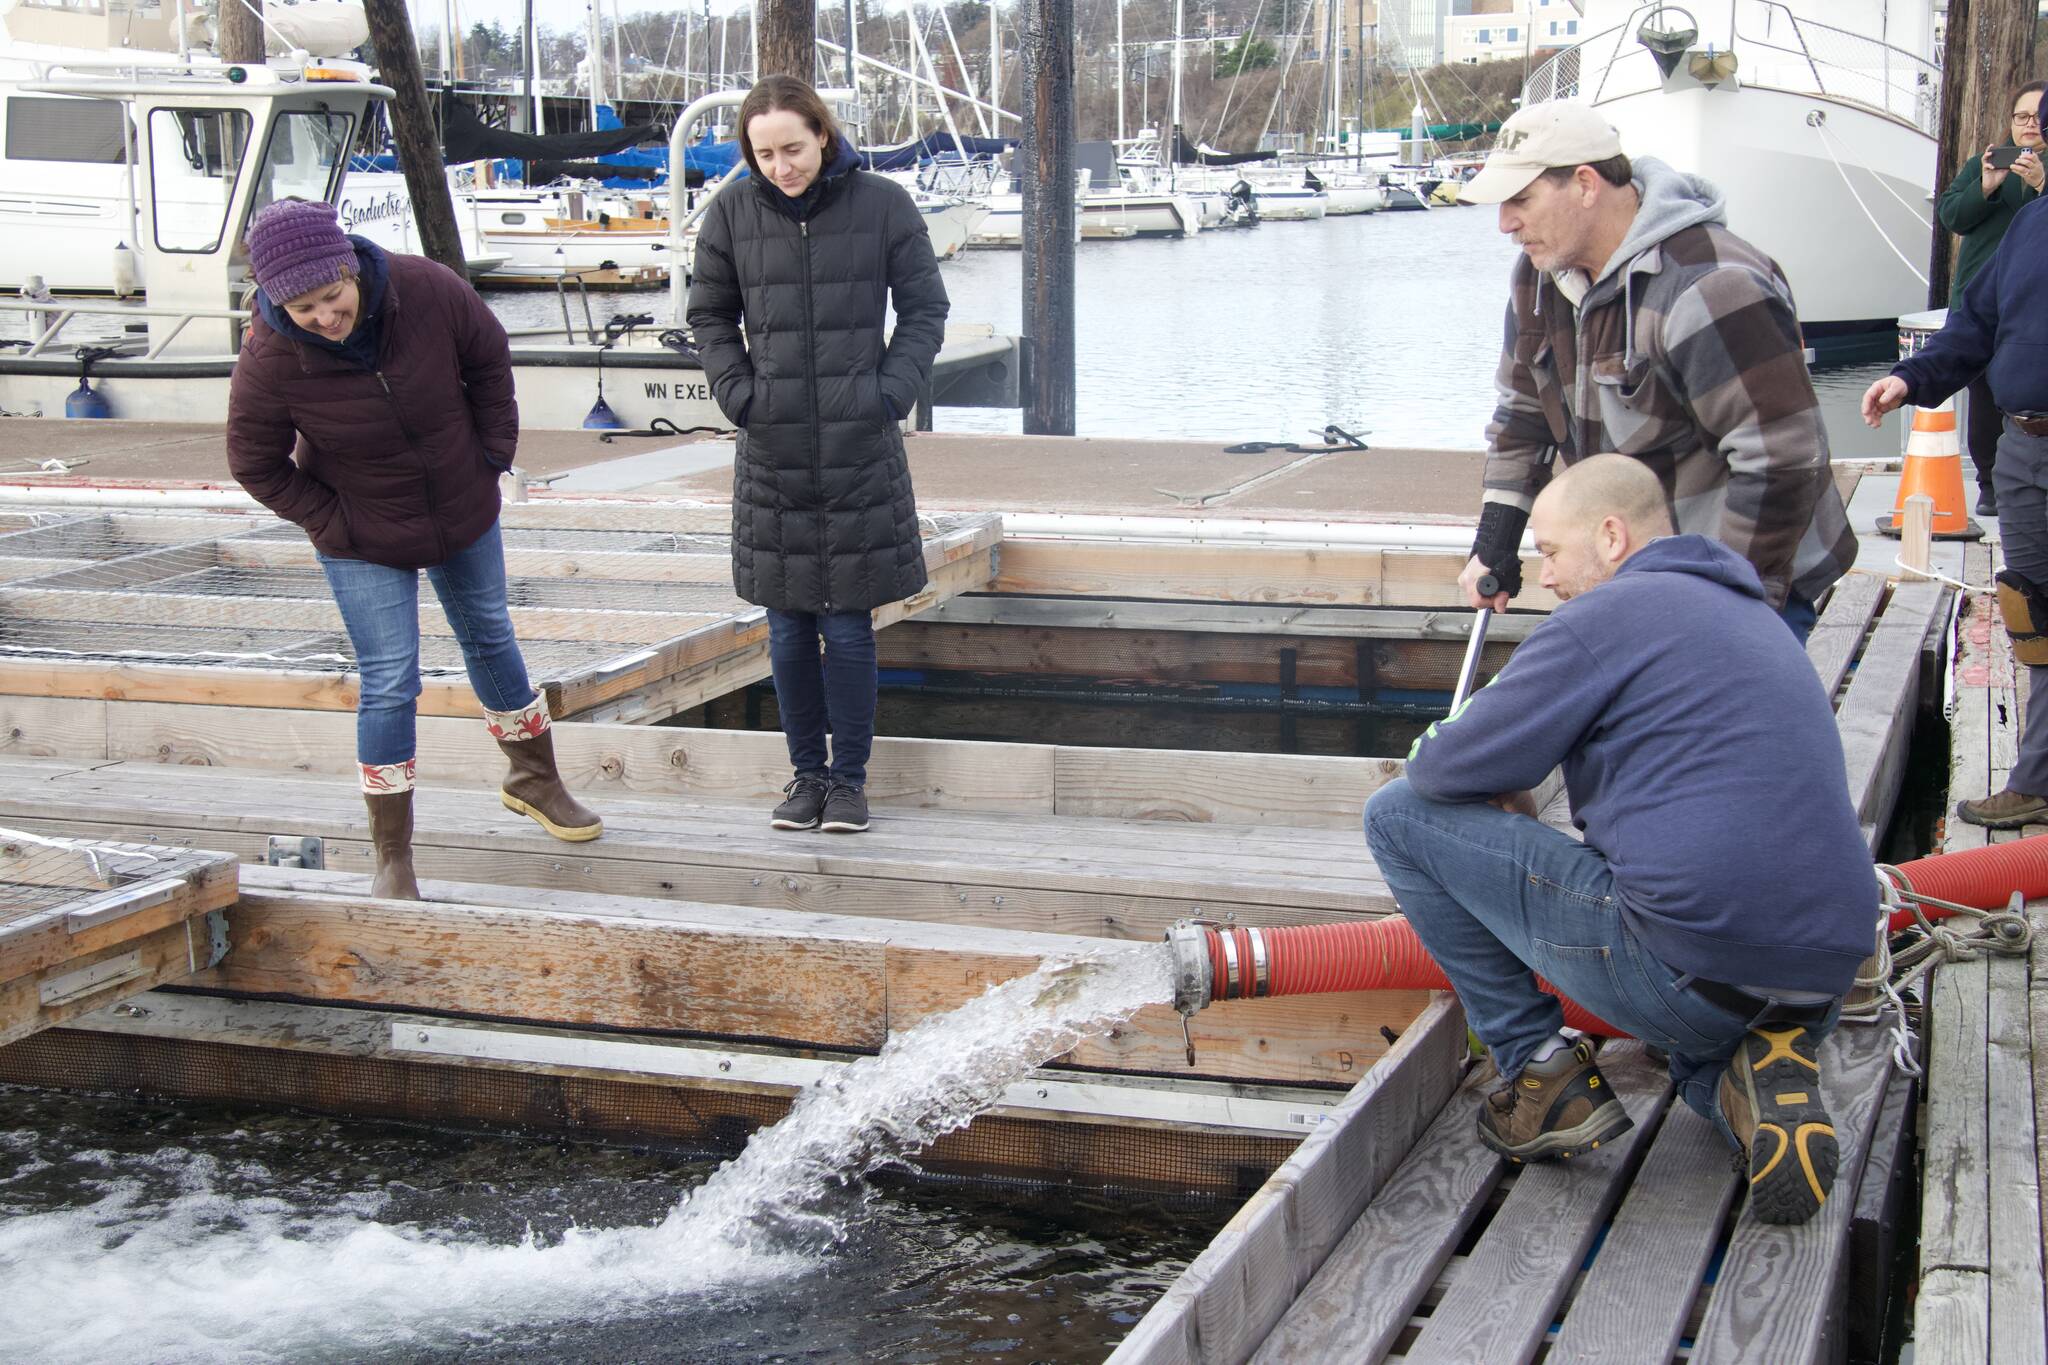 Photos by Rachel Rosen/Whidbey News-Times
From left, Kirsten Simonsen, Hailey Rosenthal, Nick Montagno and Jessie Howard watch as the salmon make their way into the Oak Harbor marina.